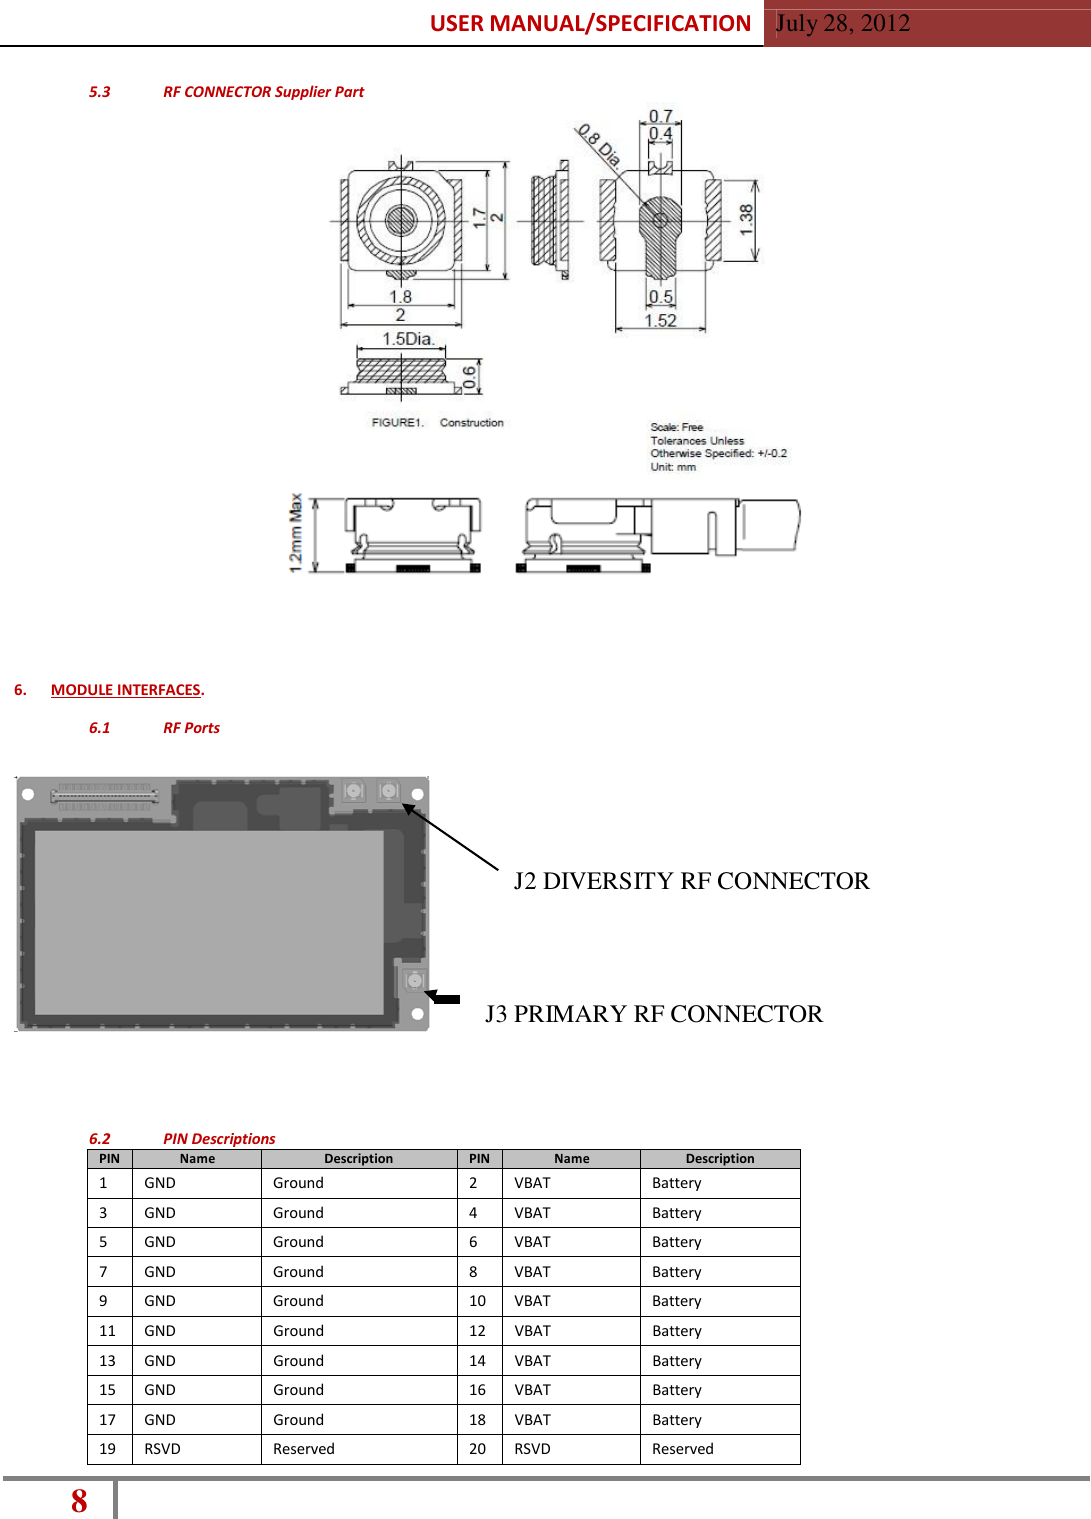 USER MANUAL/SPECIFICATION  July 28, 2012 8    5.3  RF CONNECTOR Supplier Part                             6.  MODULE INTERFACES.  6.1  RF Ports       J2 DIVERSITY RF CONNECTOR      J3 PRIMARY RF CONNECTOR      6.2  PIN Descriptions PIN Name Description PIN Name Description 1 GND Ground 2 VBAT Battery 3 GND Ground 4 VBAT Battery 5 GND Ground 6 VBAT Battery 7 GND Ground 8 VBAT Battery 9 GND Ground 10 VBAT Battery 11 GND Ground 12 VBAT Battery 13 GND Ground 14 VBAT Battery 15 GND Ground 16 VBAT Battery 17 GND Ground 18 VBAT Battery 19 RSVD Reserved 20 RSVD Reserved 